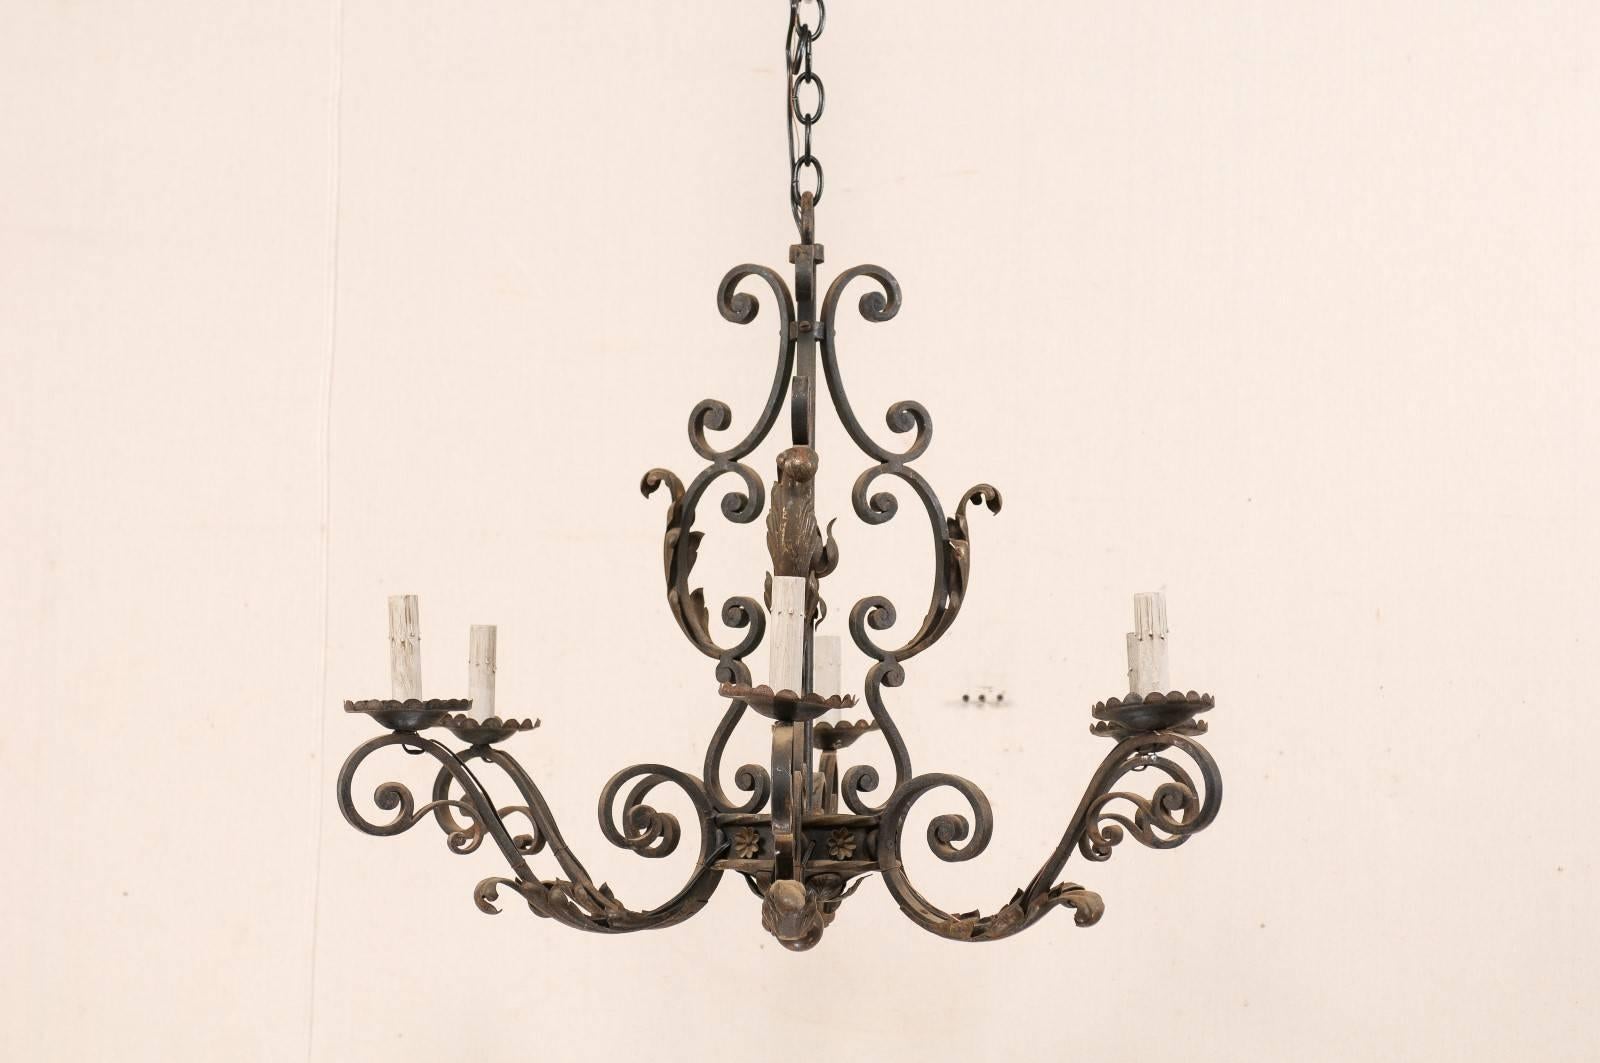 A French iron six-light chandelier from the mid-20th century. The armature of this vintage French chandelier is comprised of a series of C-scroll and S-scrolled forged iron motifs, decorated with acanthus leaves and small flowers. Each of the six